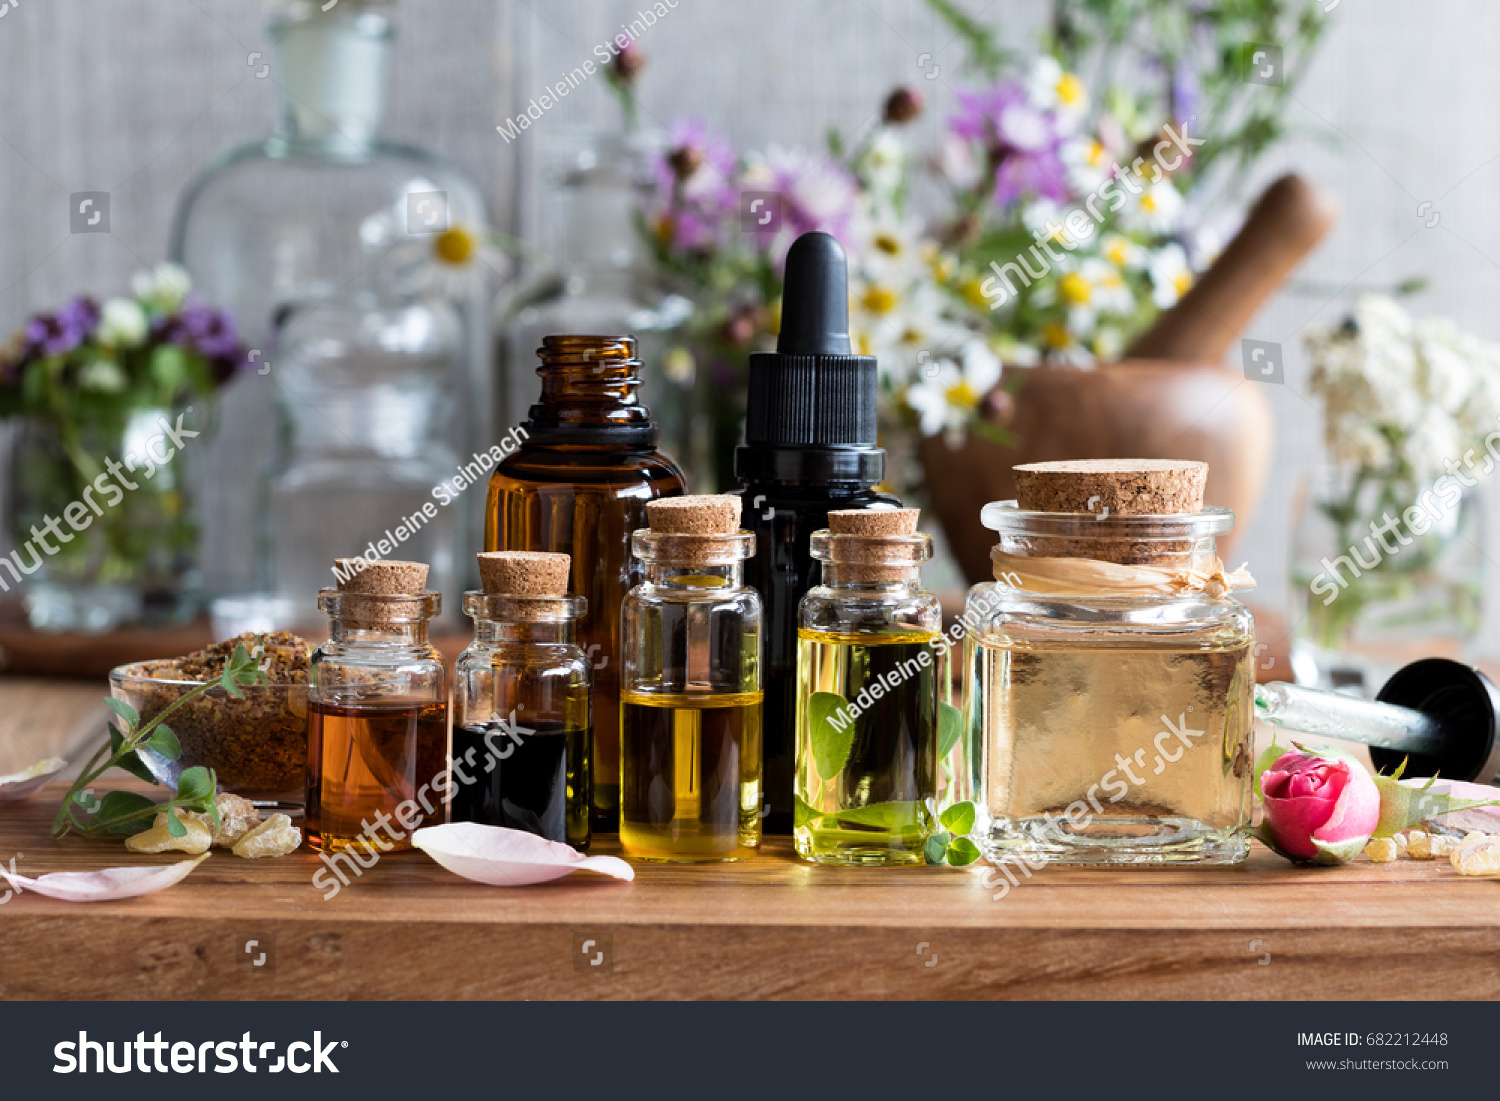 Selection of essential oils, with herbs and flowers in the background #682212448